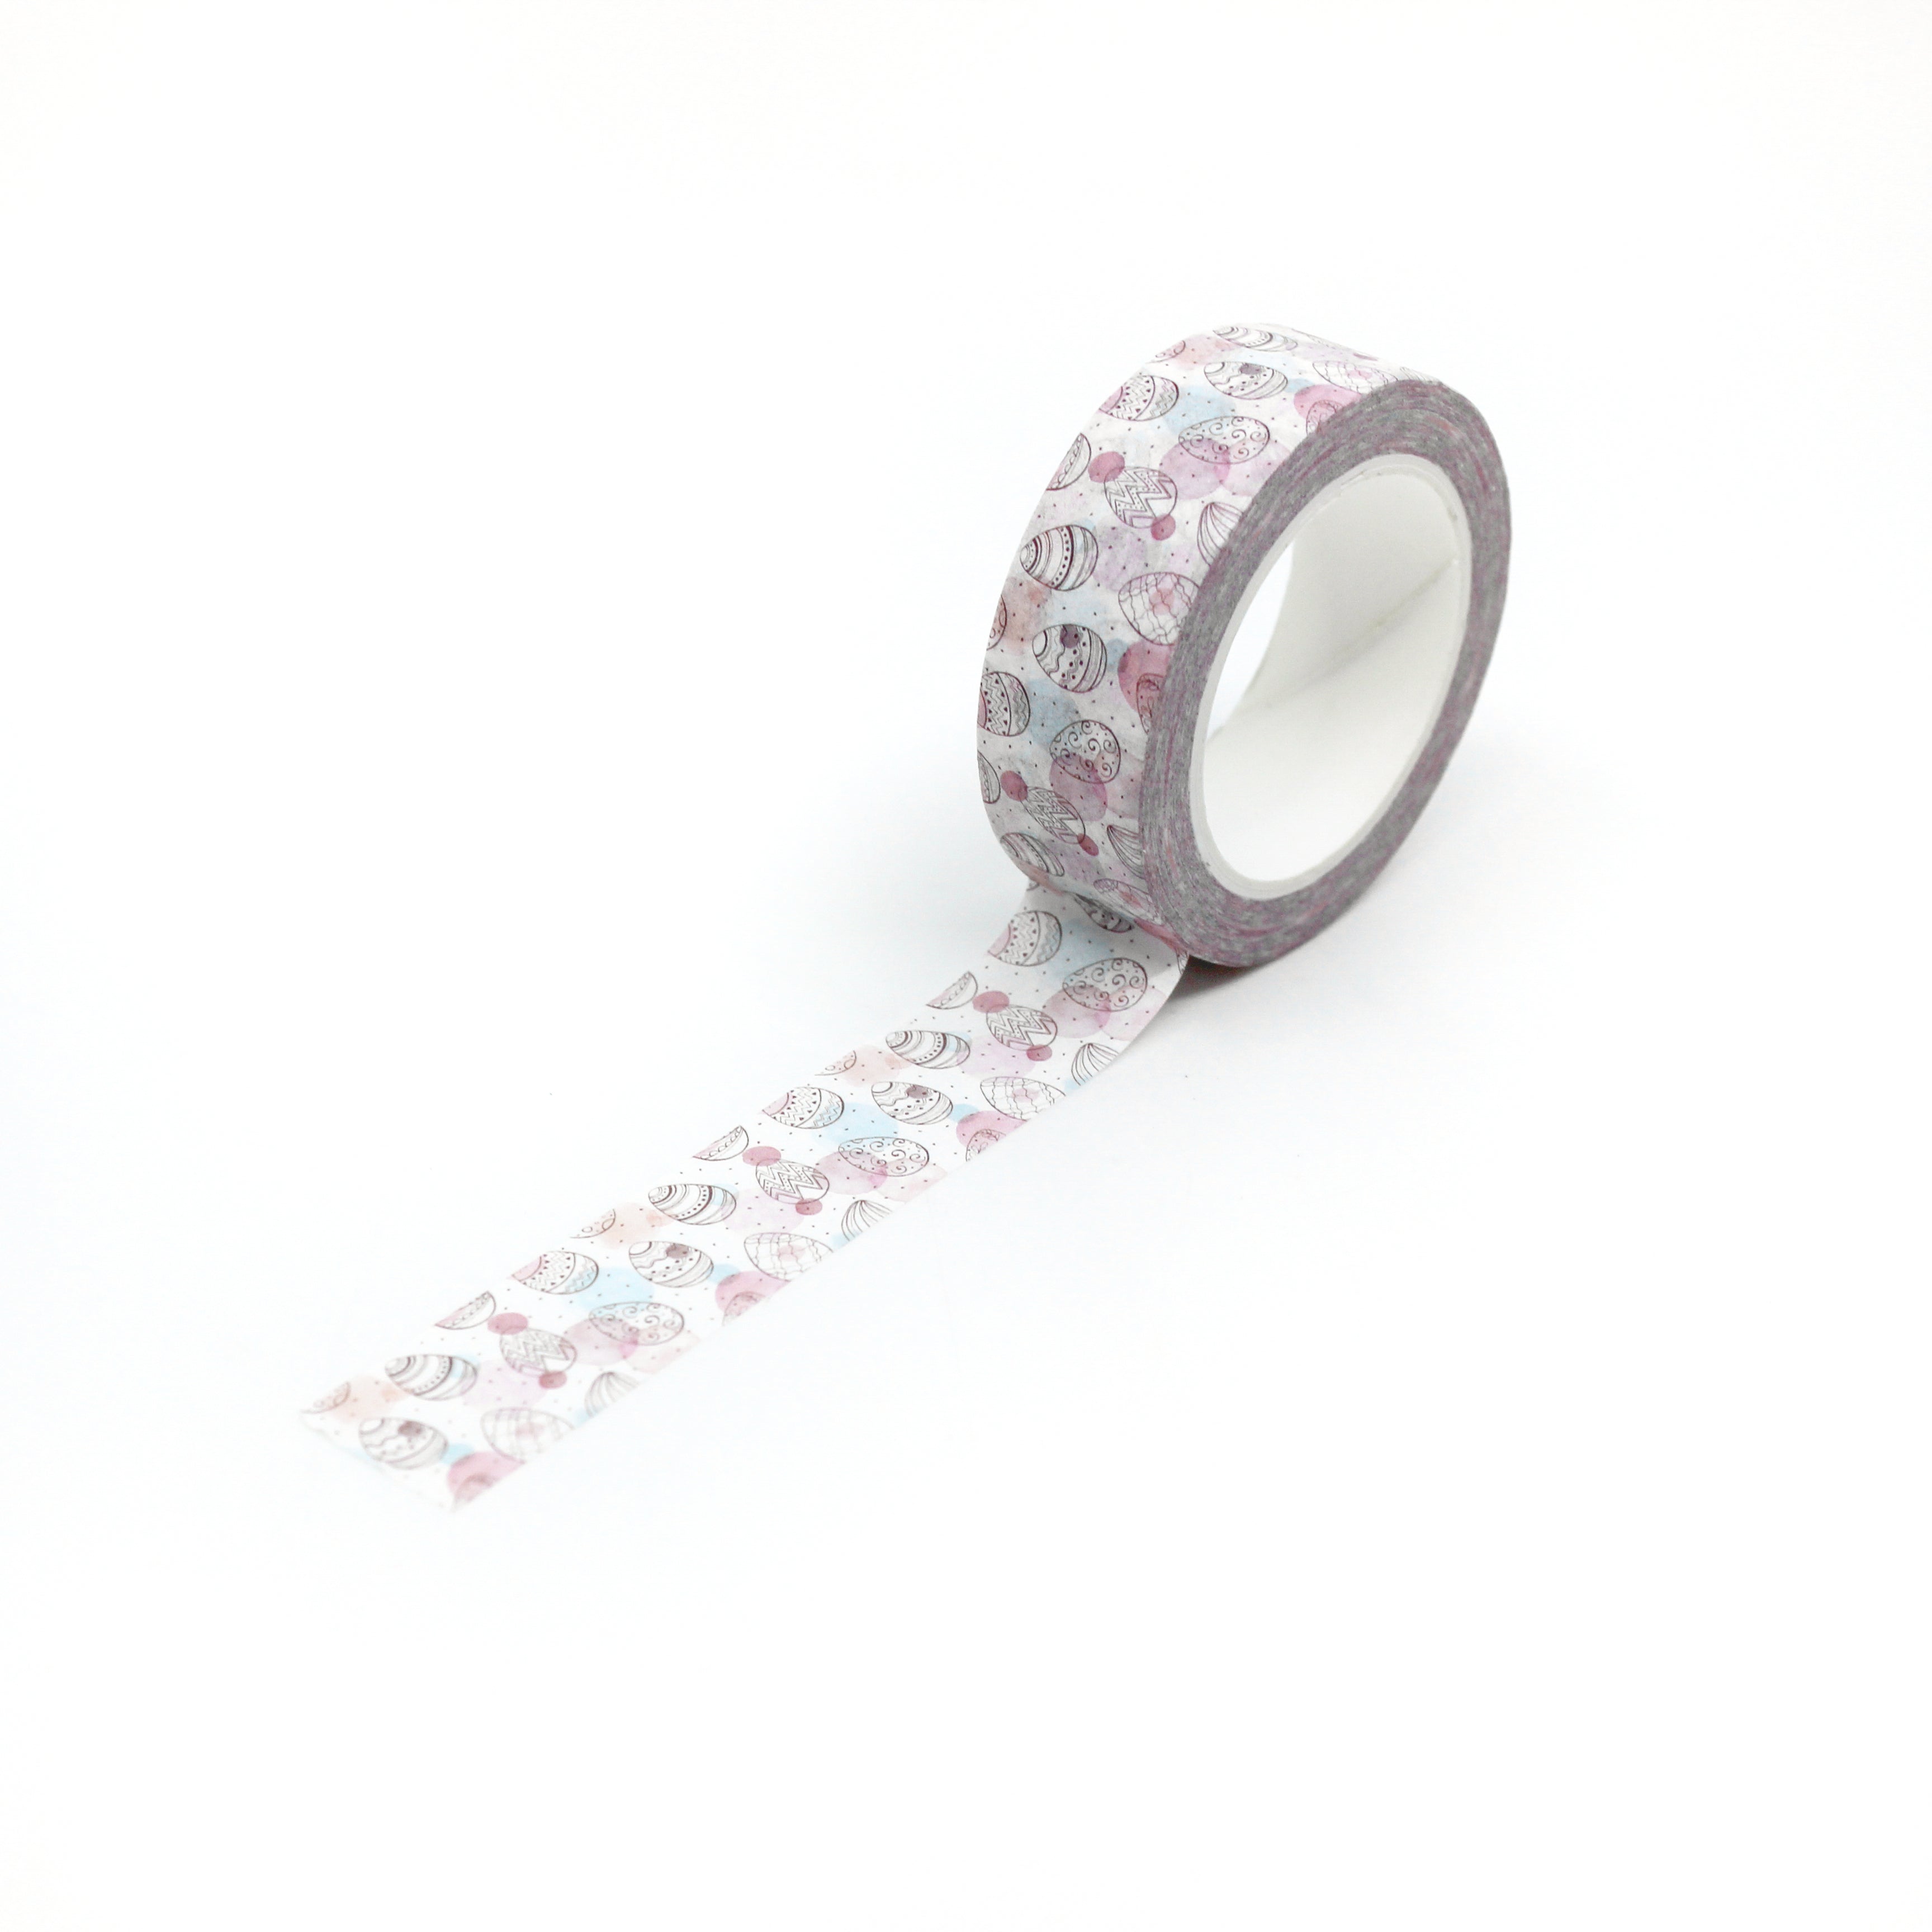  Pastel Easter Eggs Pattern Washi Tape: Decorate your Easter projects with this delightful washi tape featuring a pattern of colorful pastel Easter eggs. Perfect for adding a festive touch to cards, scrapbooks, and more! This tape is sold at BBB Supplies Craft Shop.